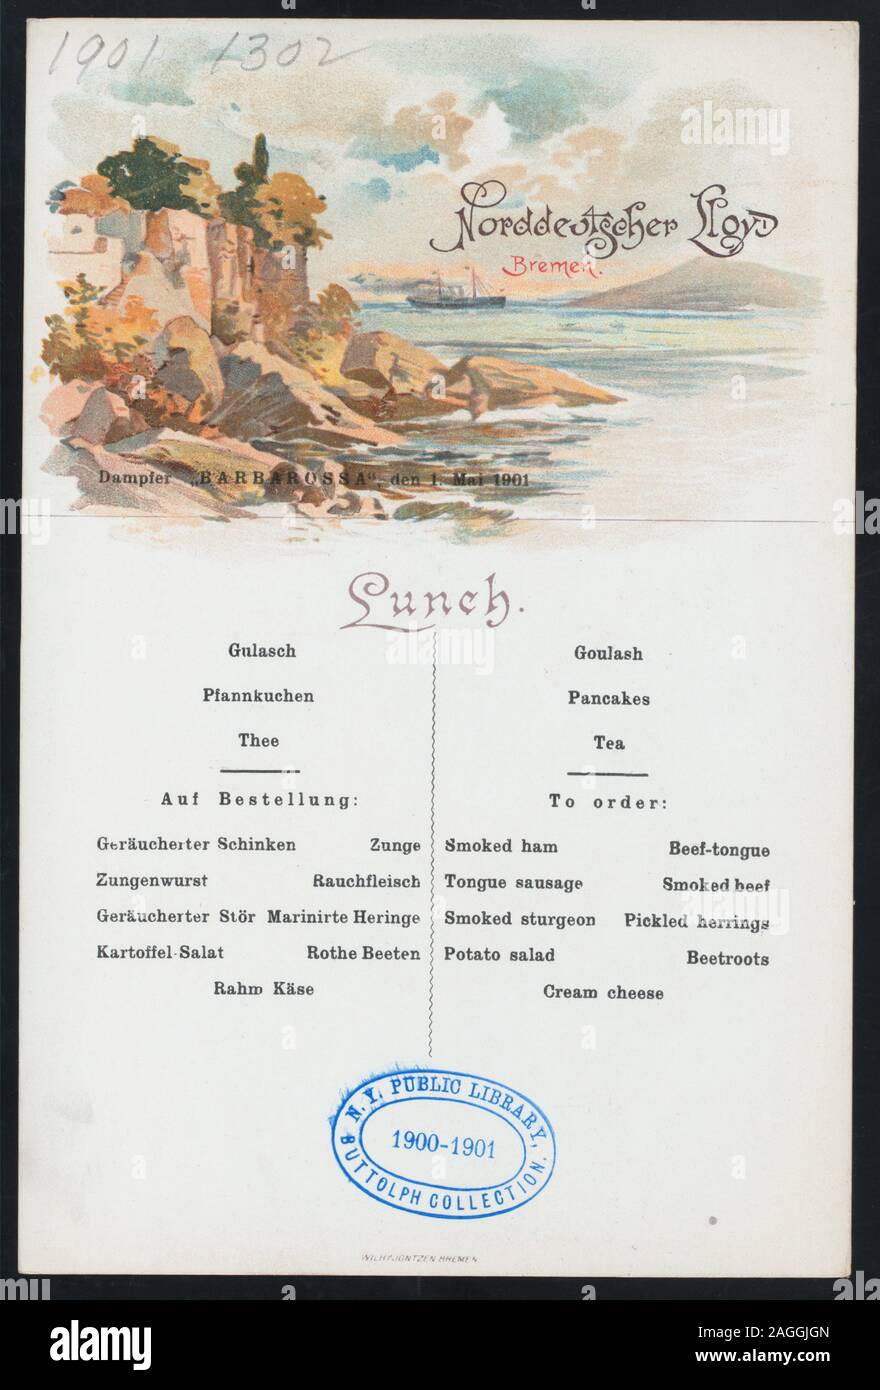 SHIP AT SEA NEAR HILLY COAST; MENUS SEPARATE IN GERMAN AND ENGLISH;MAY BE USED AS POSTCARD Citation/Reference: 1901-1106; LUNCH [held by] NORDDEUTSCHER LLOYD BREMEN [at] SS BARBAROSSA (SS;) Stock Photo